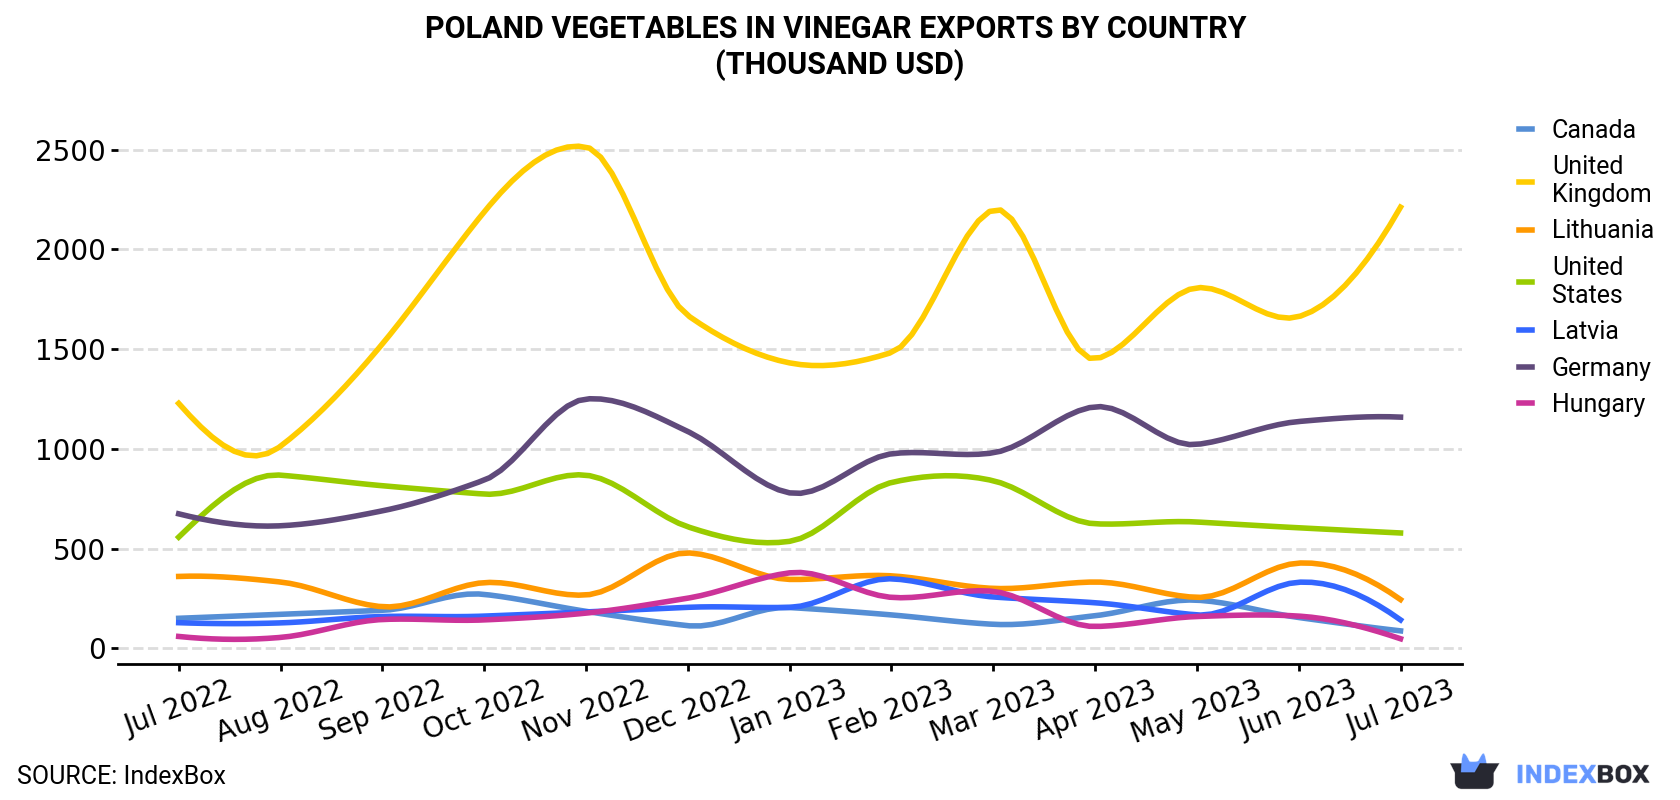 Poland Vegetables In Vinegar Exports By Country (Thousand USD)